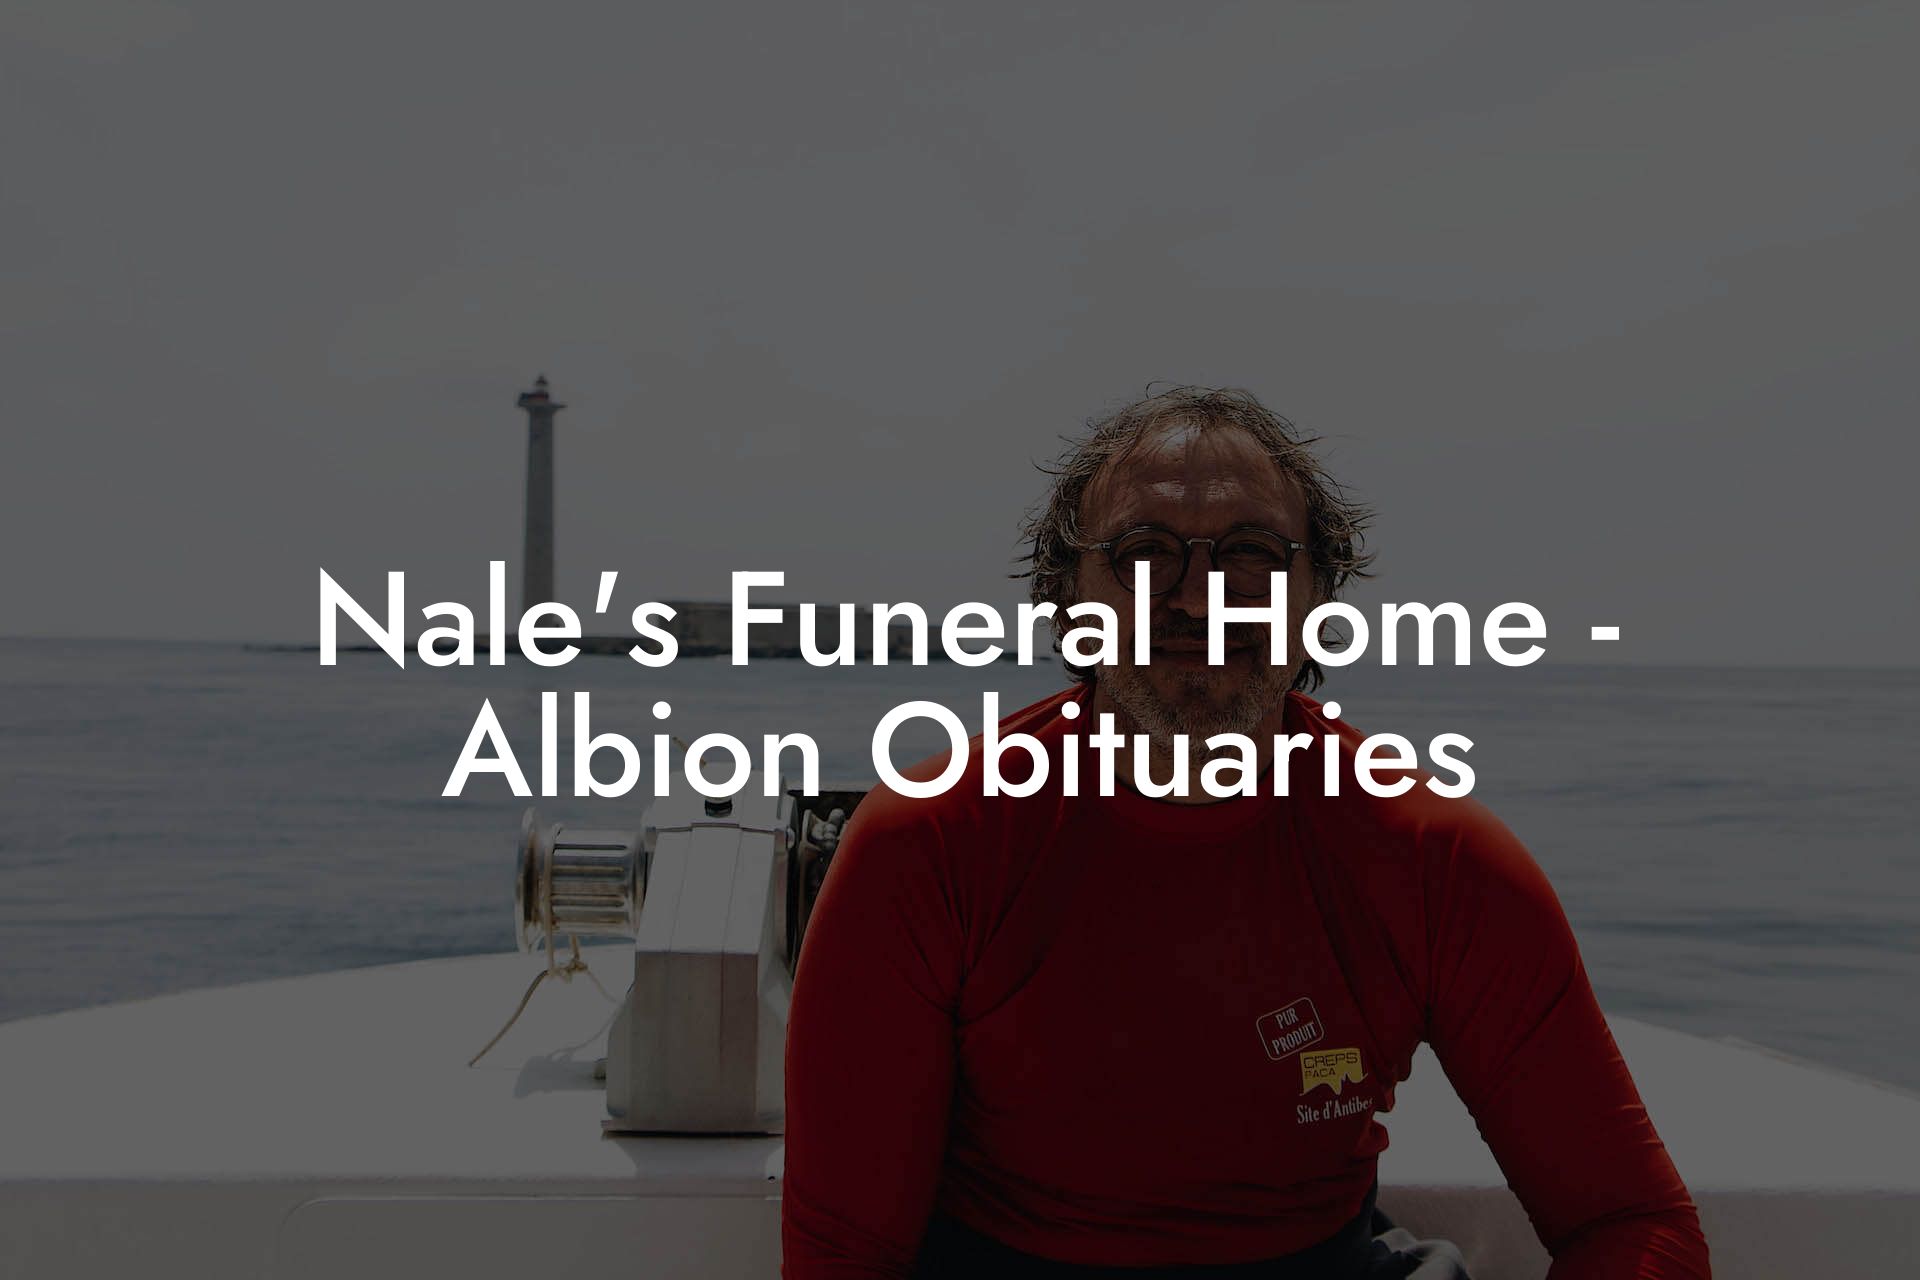 Nale's Funeral Home - Albion Obituaries